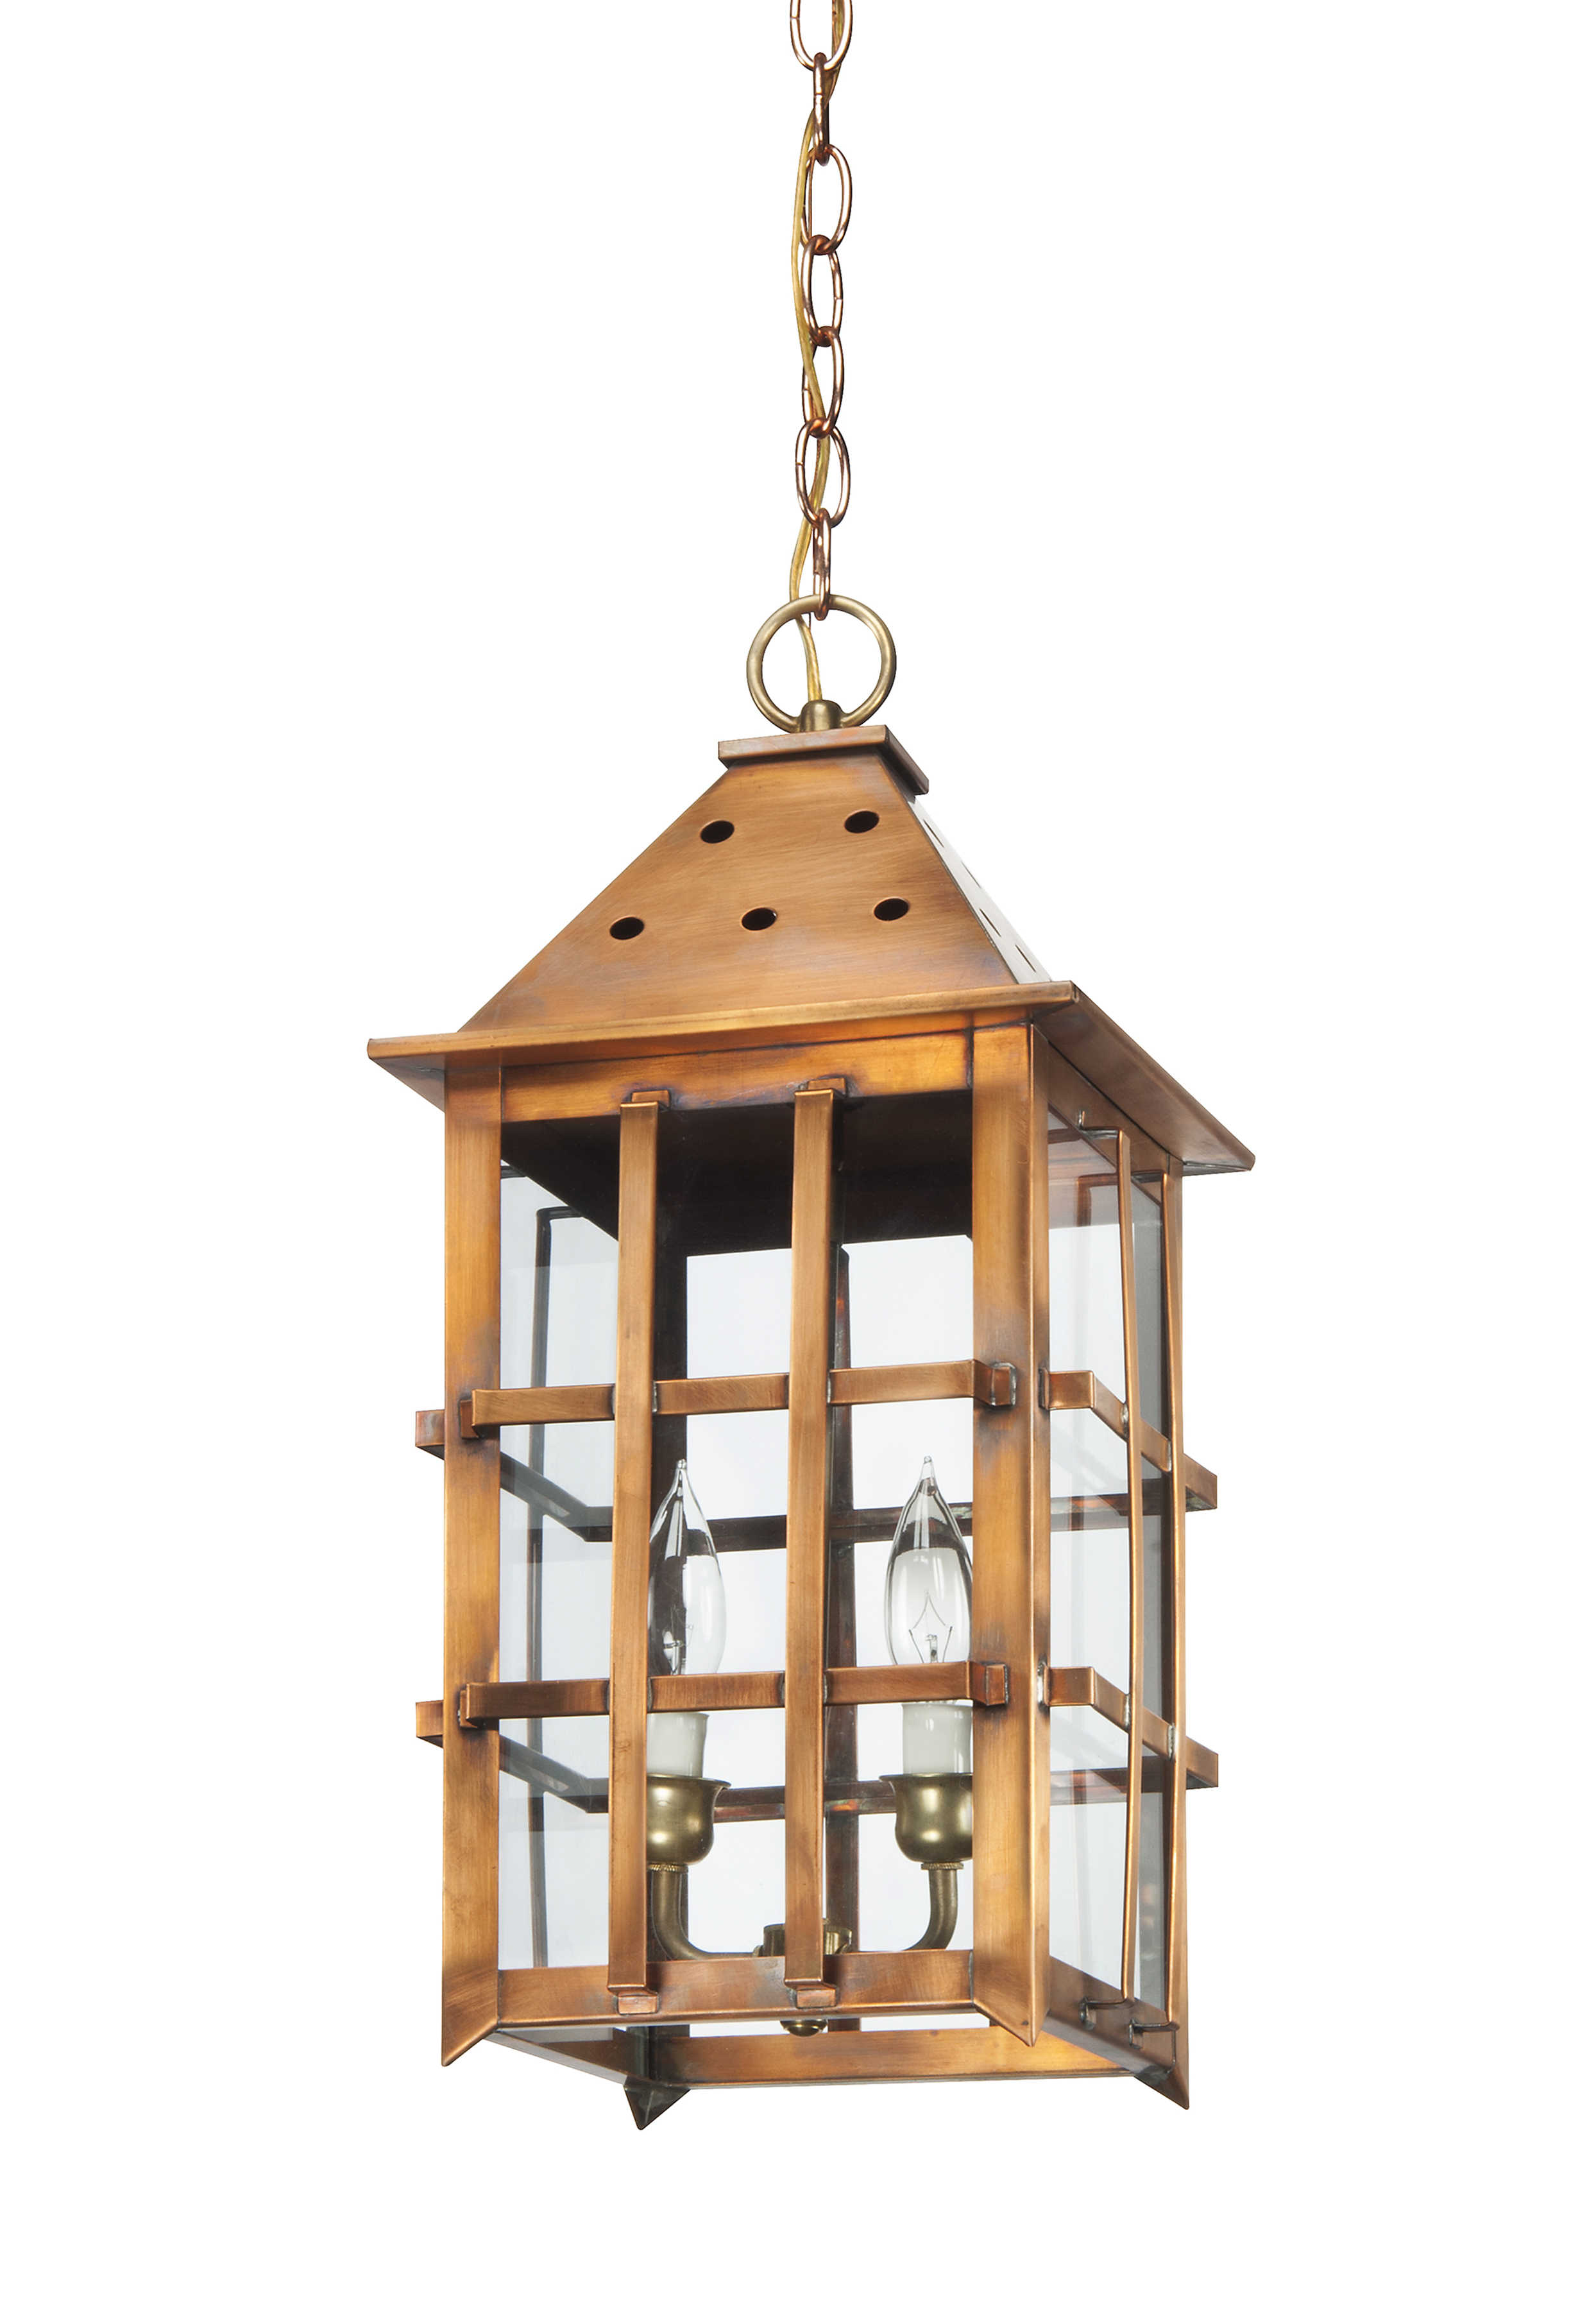 St. Michaels Alley Collection SM-3 hanging bronze lantern hanging lantern copper lantern electric lantern traditional electric lantern traditional lantern traditional hanging light coastal lighting